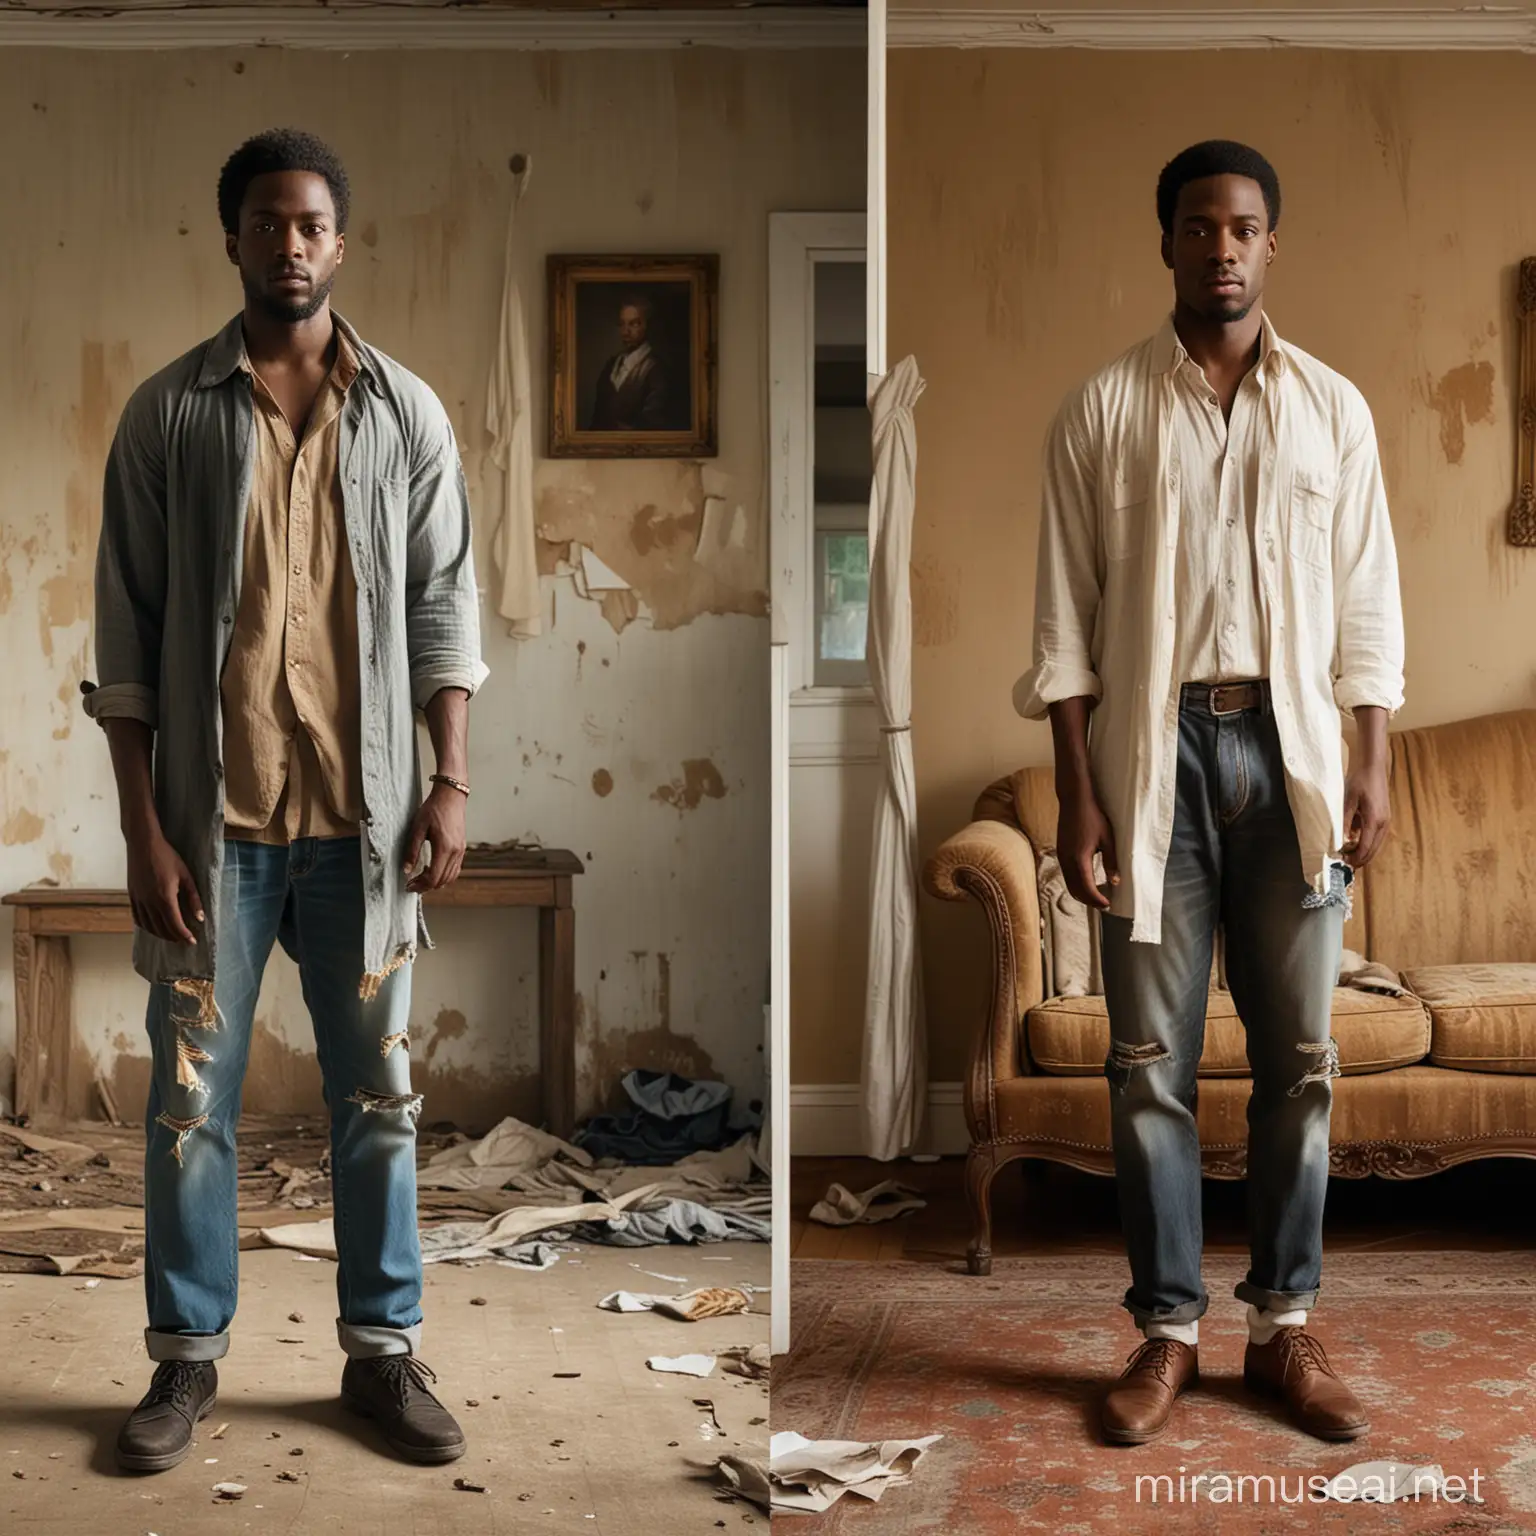 Transformation of an African American Man from Poverty to Wealth